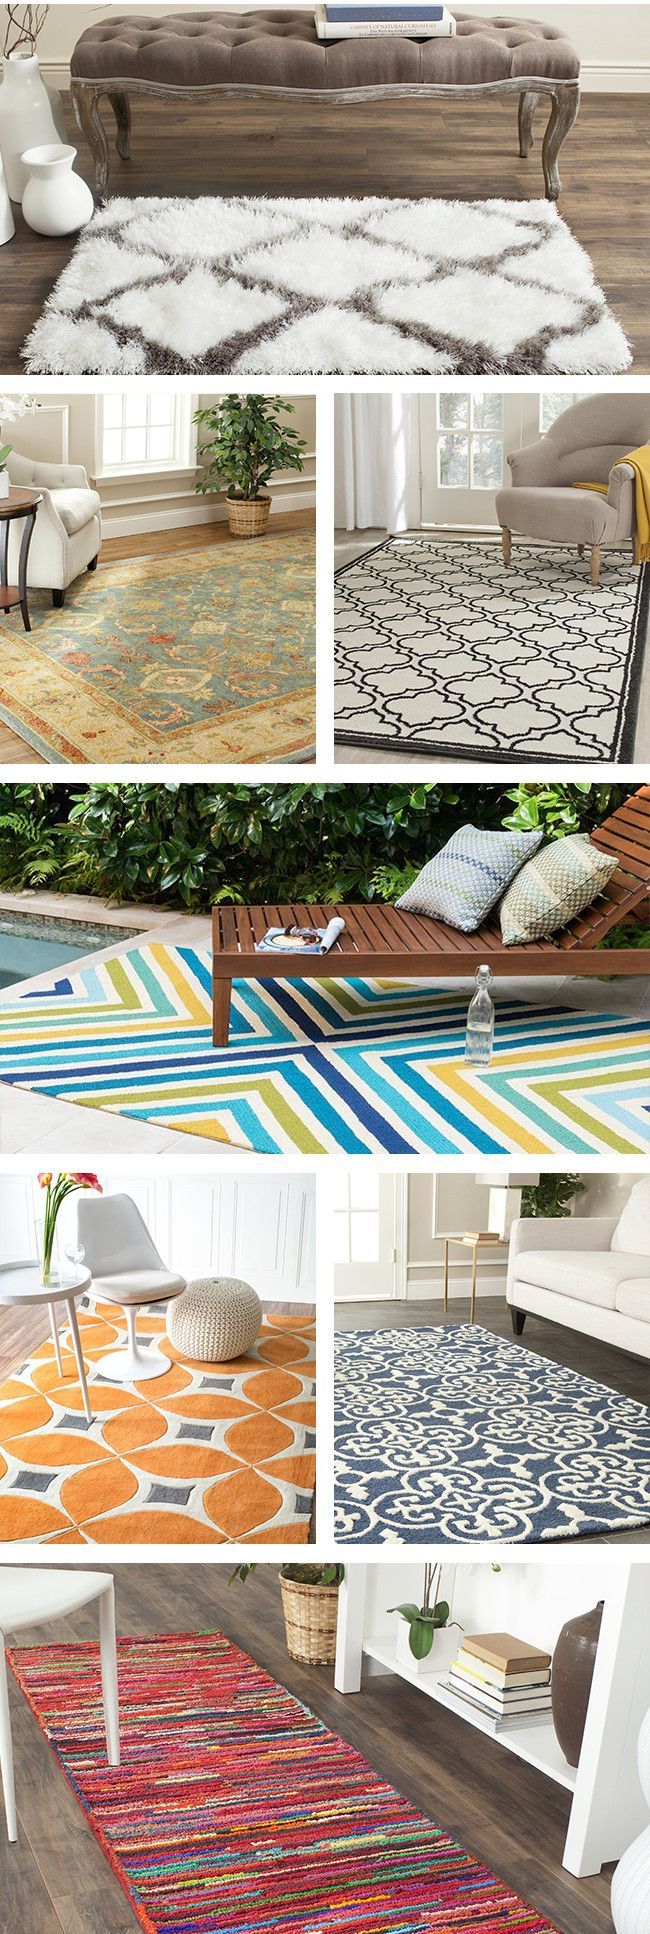 Area rugs, especially those with patterns, help set the tone of a room. Bright chevron and geometric prints lend excitement to living rooms, while eye-catching florals complement cozy dining areas. Visit Wayfair and sign up today to get access to exclusive deals everyday up to 70% off. Free shipping on all orders over $49. -   21 diy projects For Summer crochet patterns
 ideas